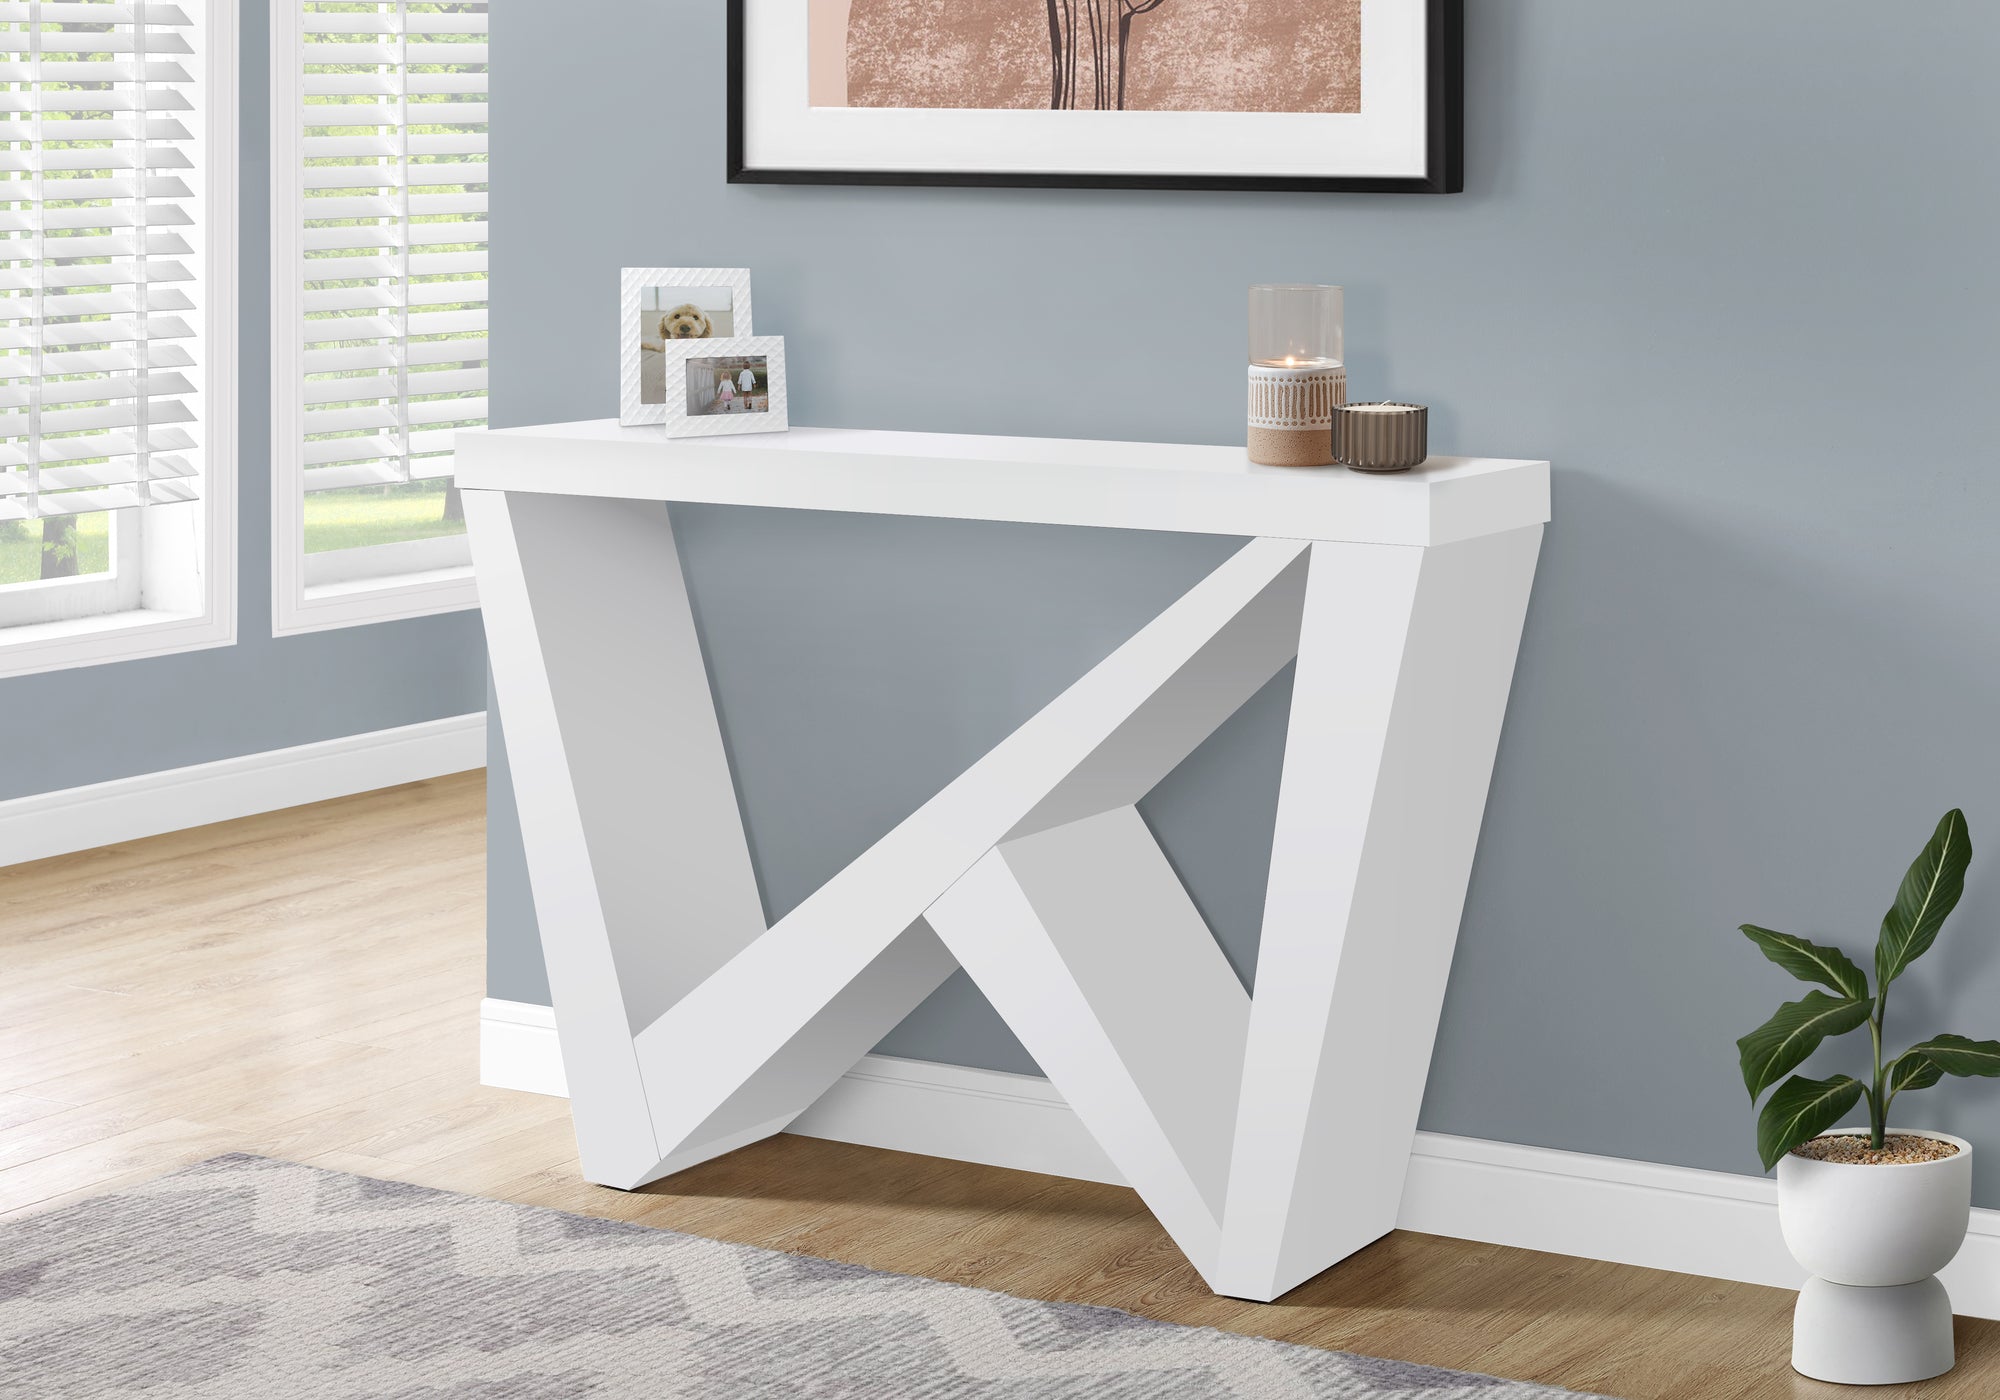 MN-142429    Accent Table, Console, Entryway, Narrow, Sofa, Living Room, Bedroom, Laminate, White, Contemporary, Modern